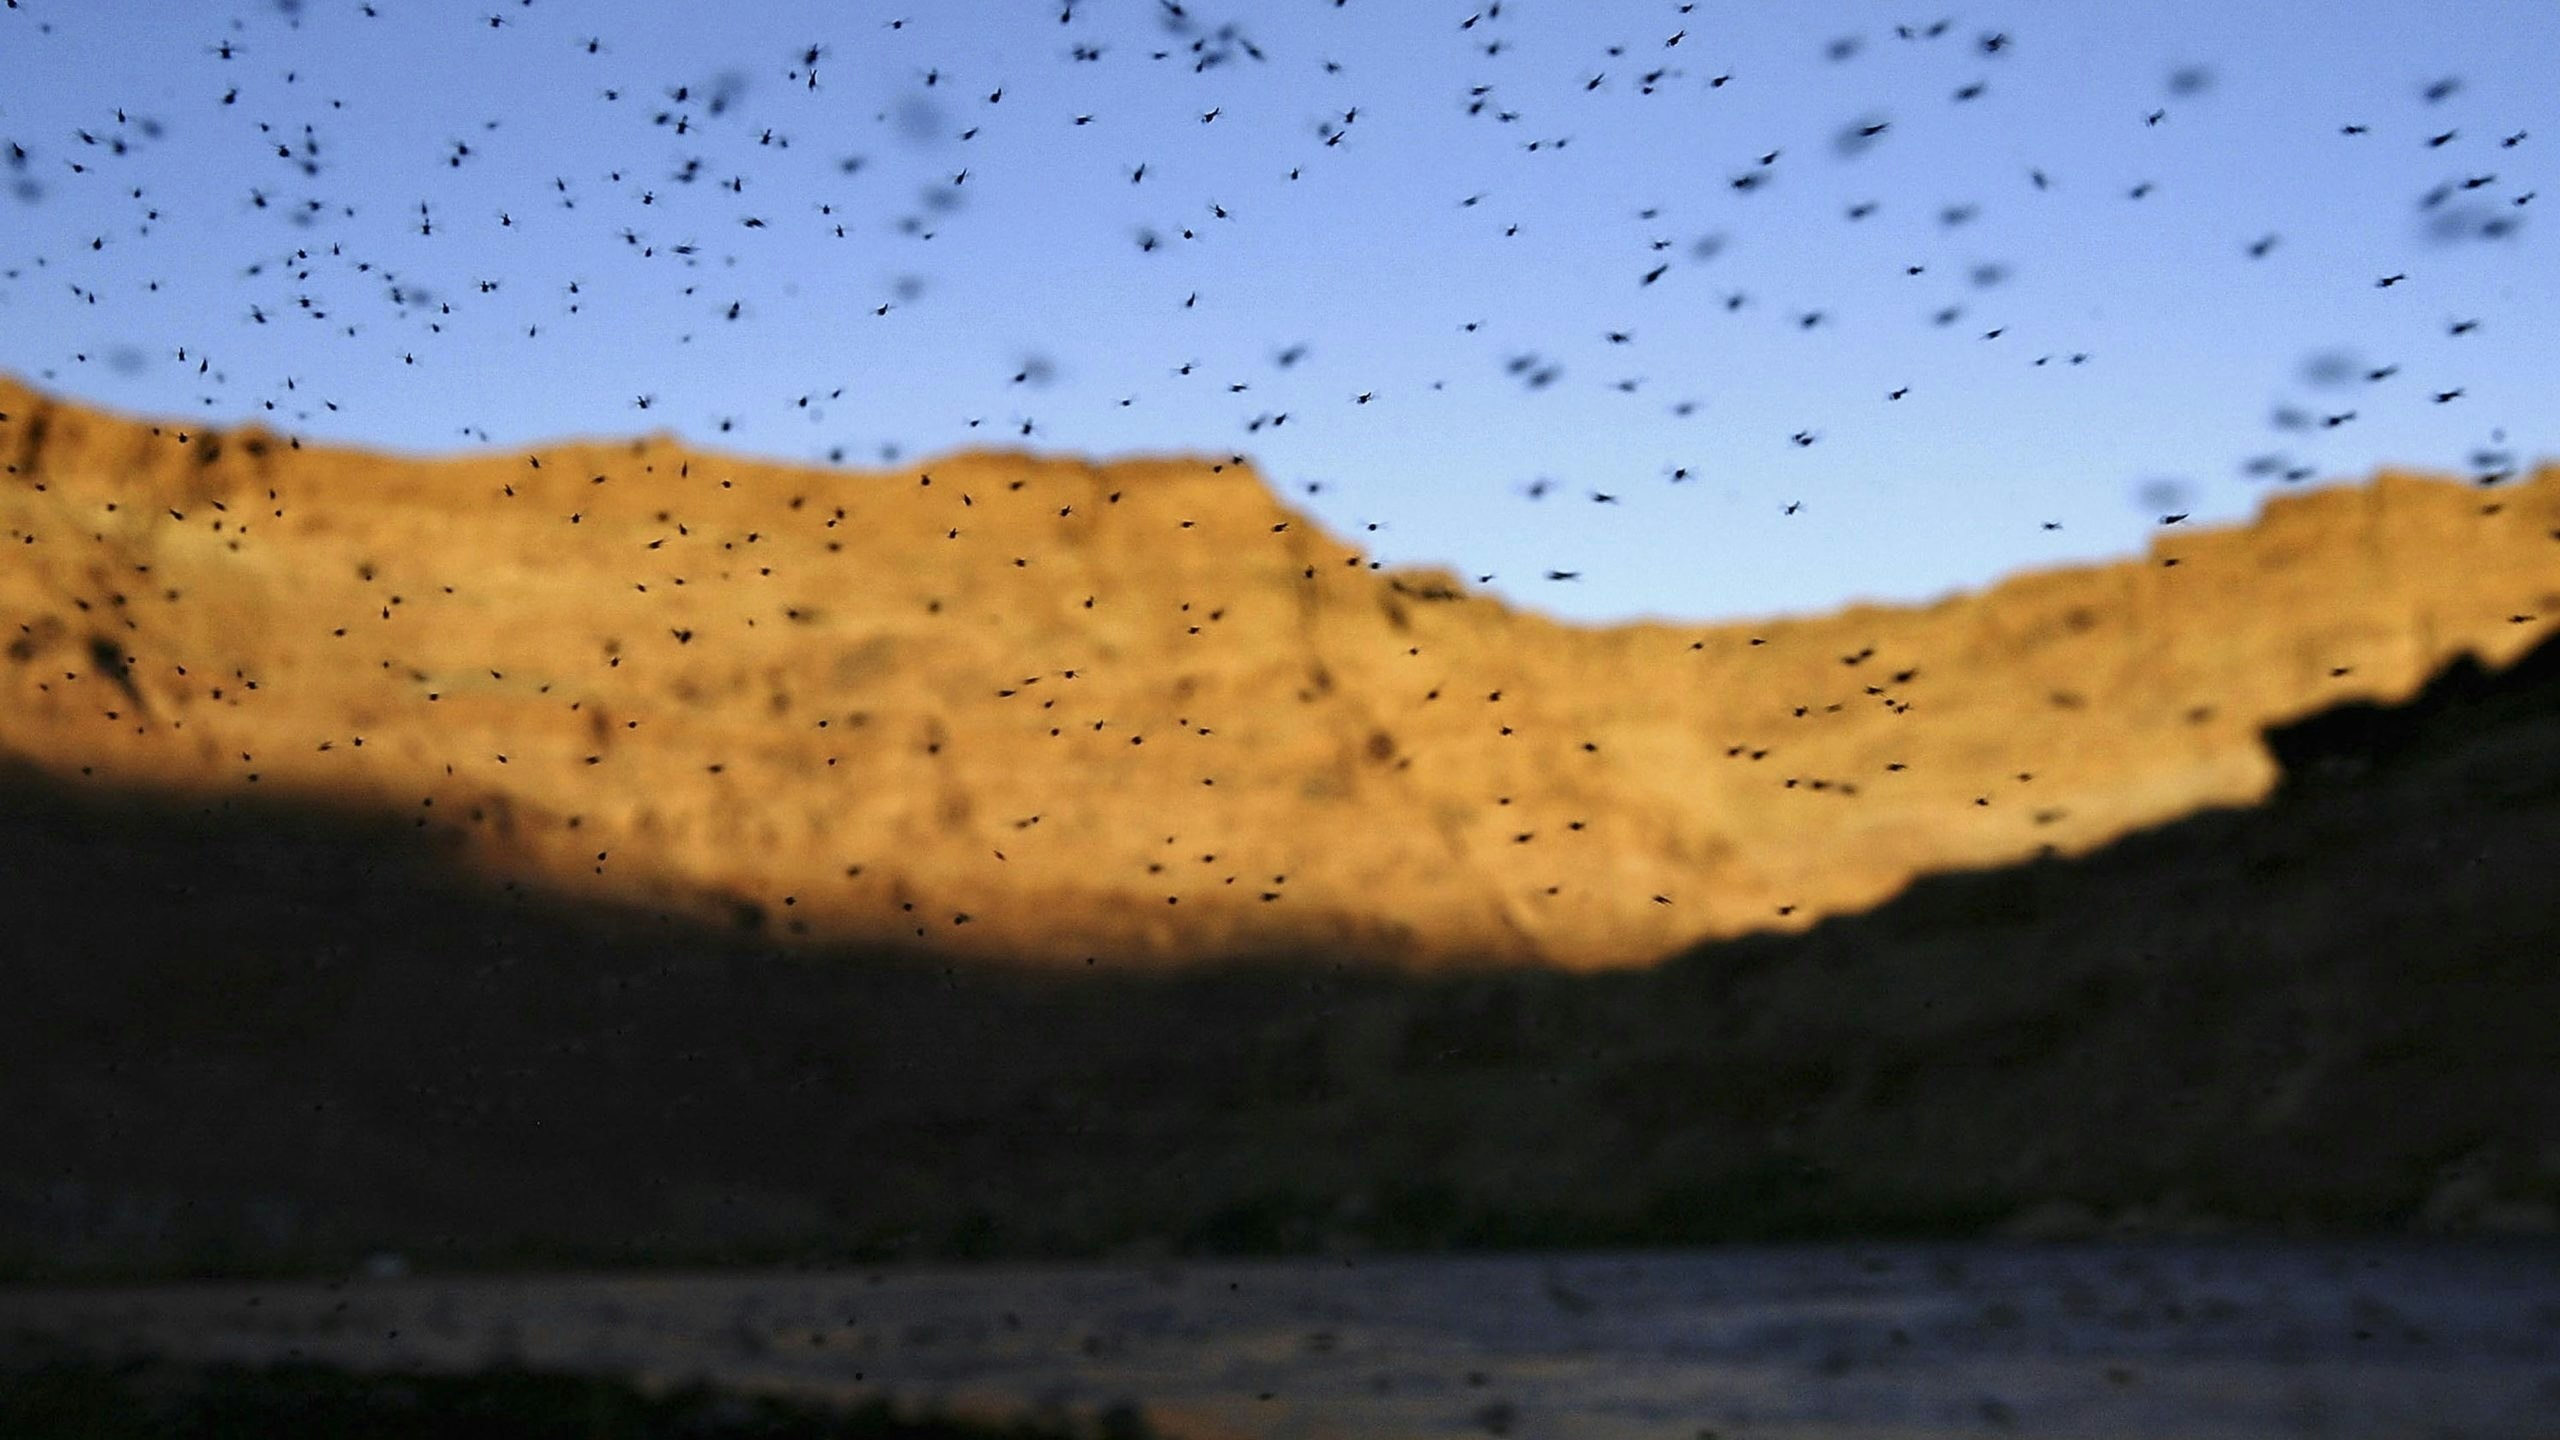 Swarm of mosquitoes scaled